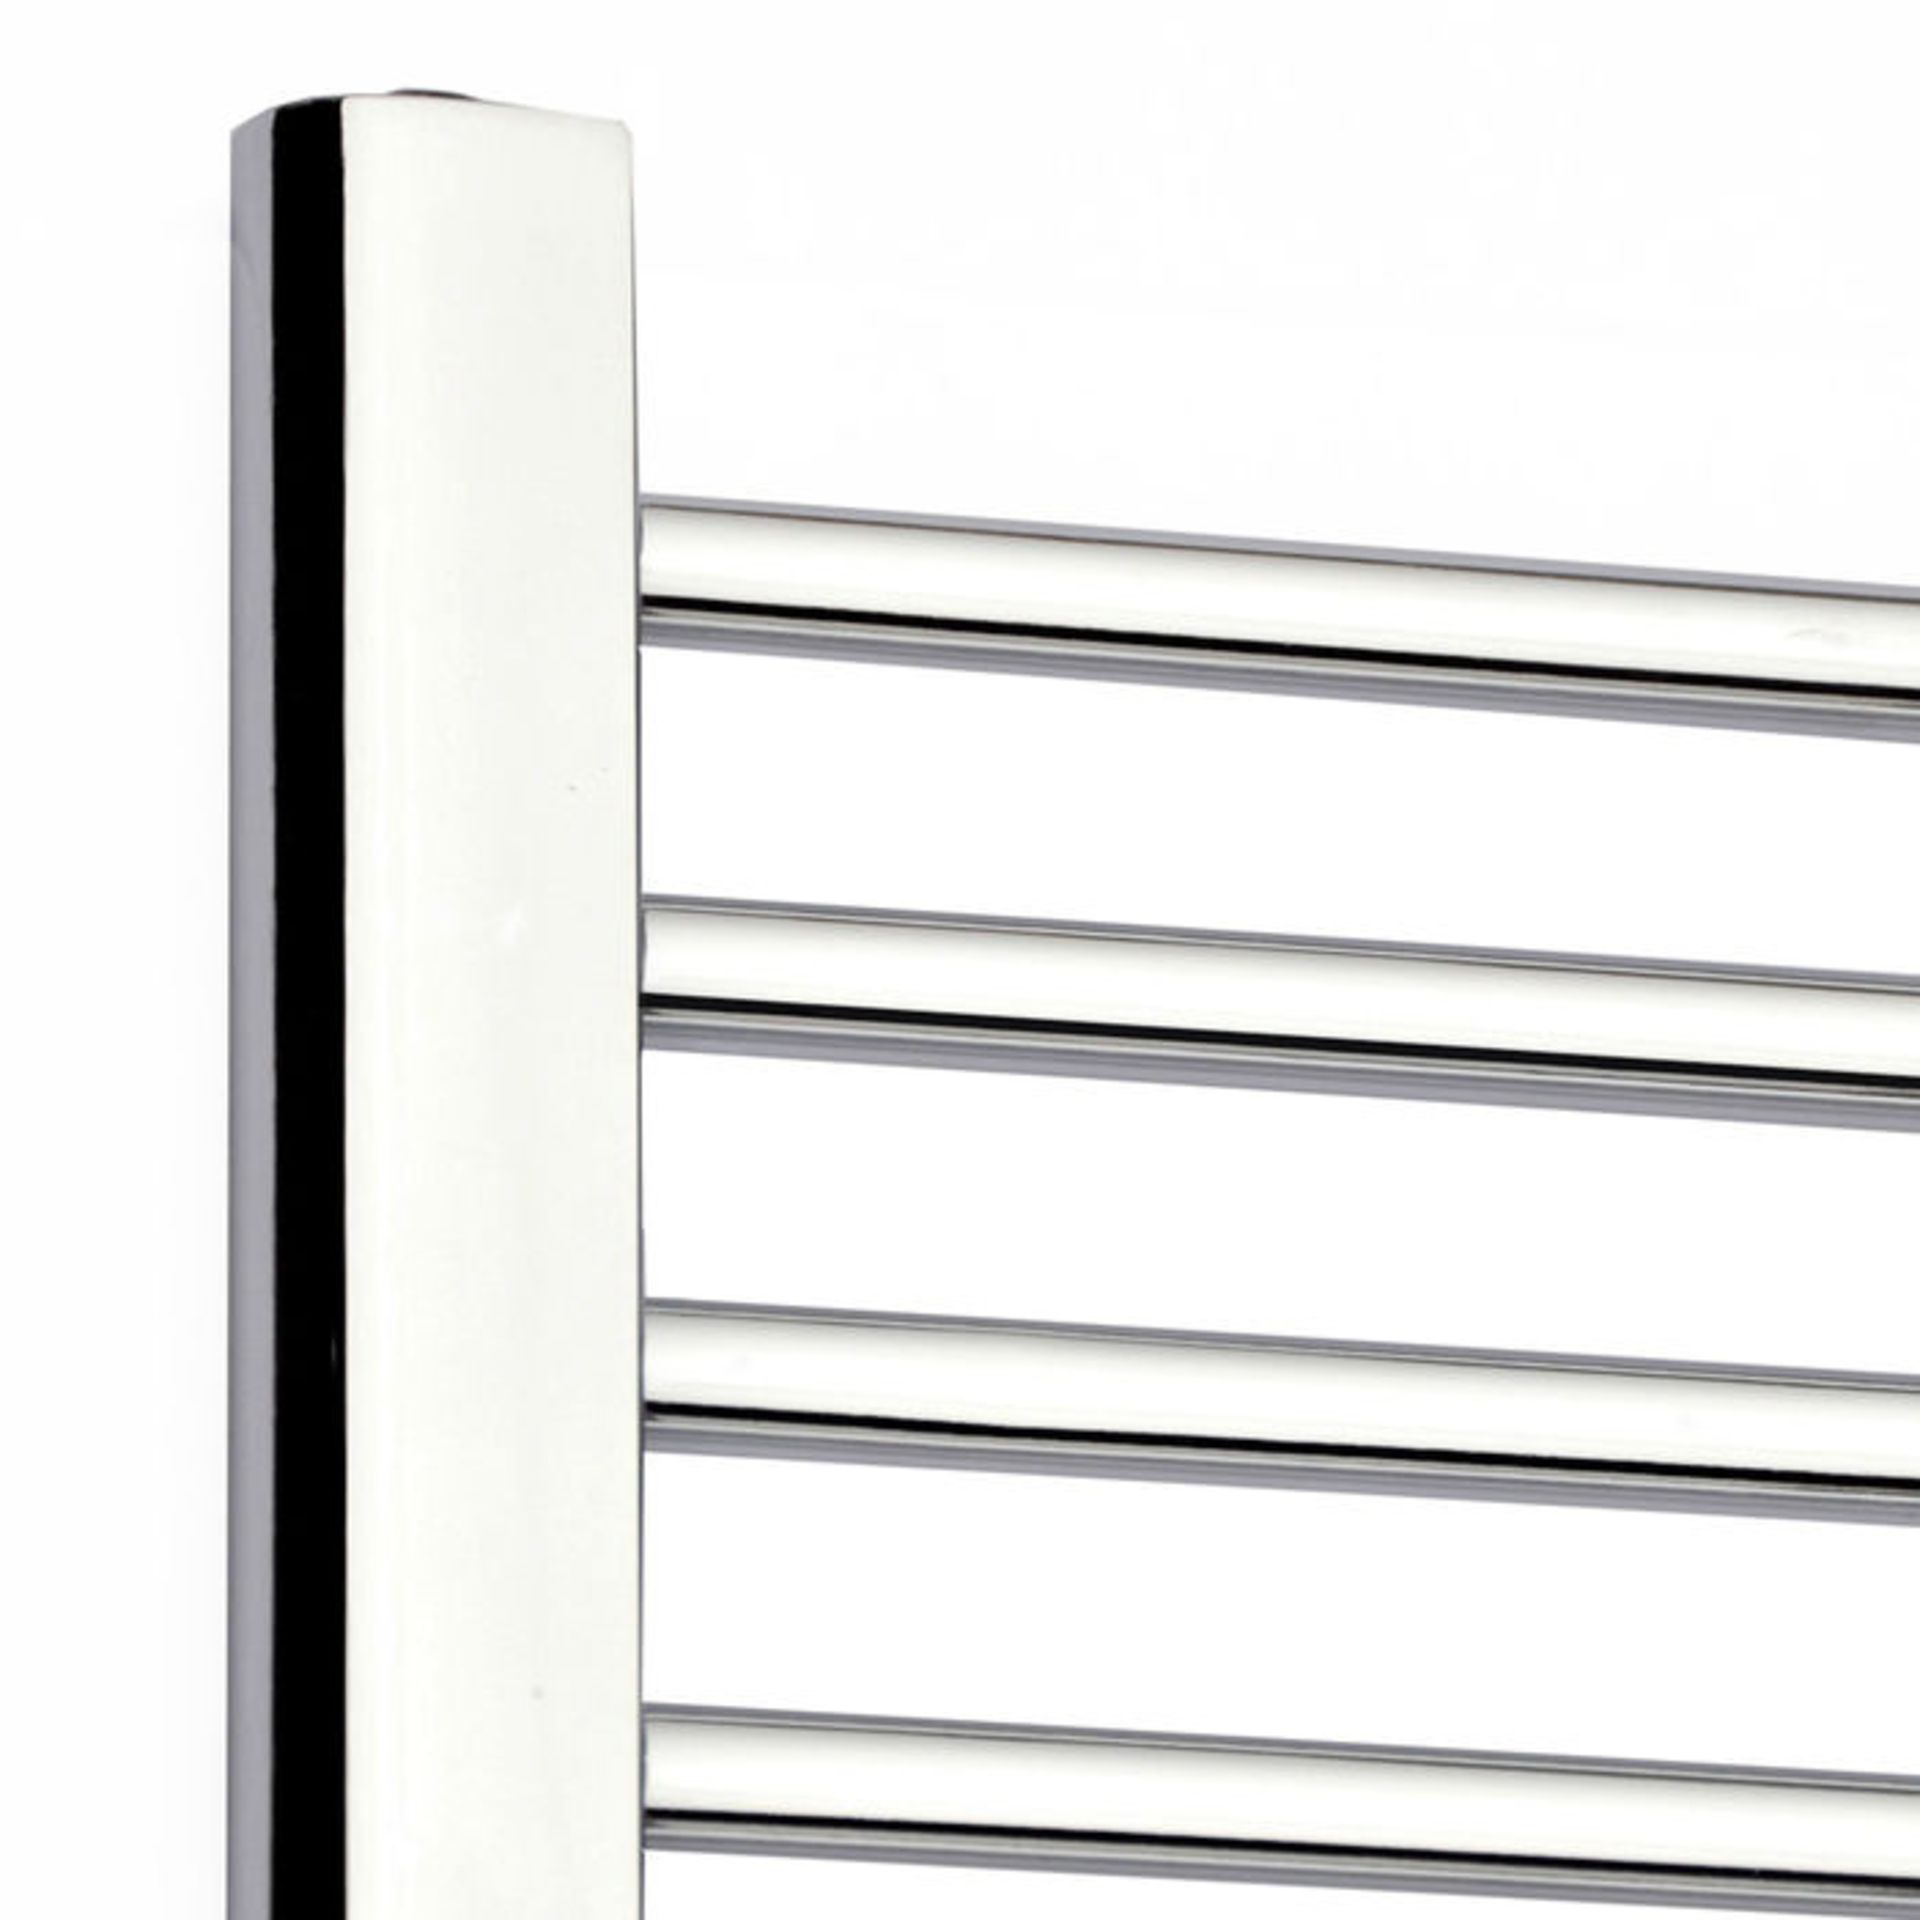 (KL101) 650x400mm Straight Heated Towel Radiator. RRP £44.00. Low carbon steel chrome plated - Image 3 of 3